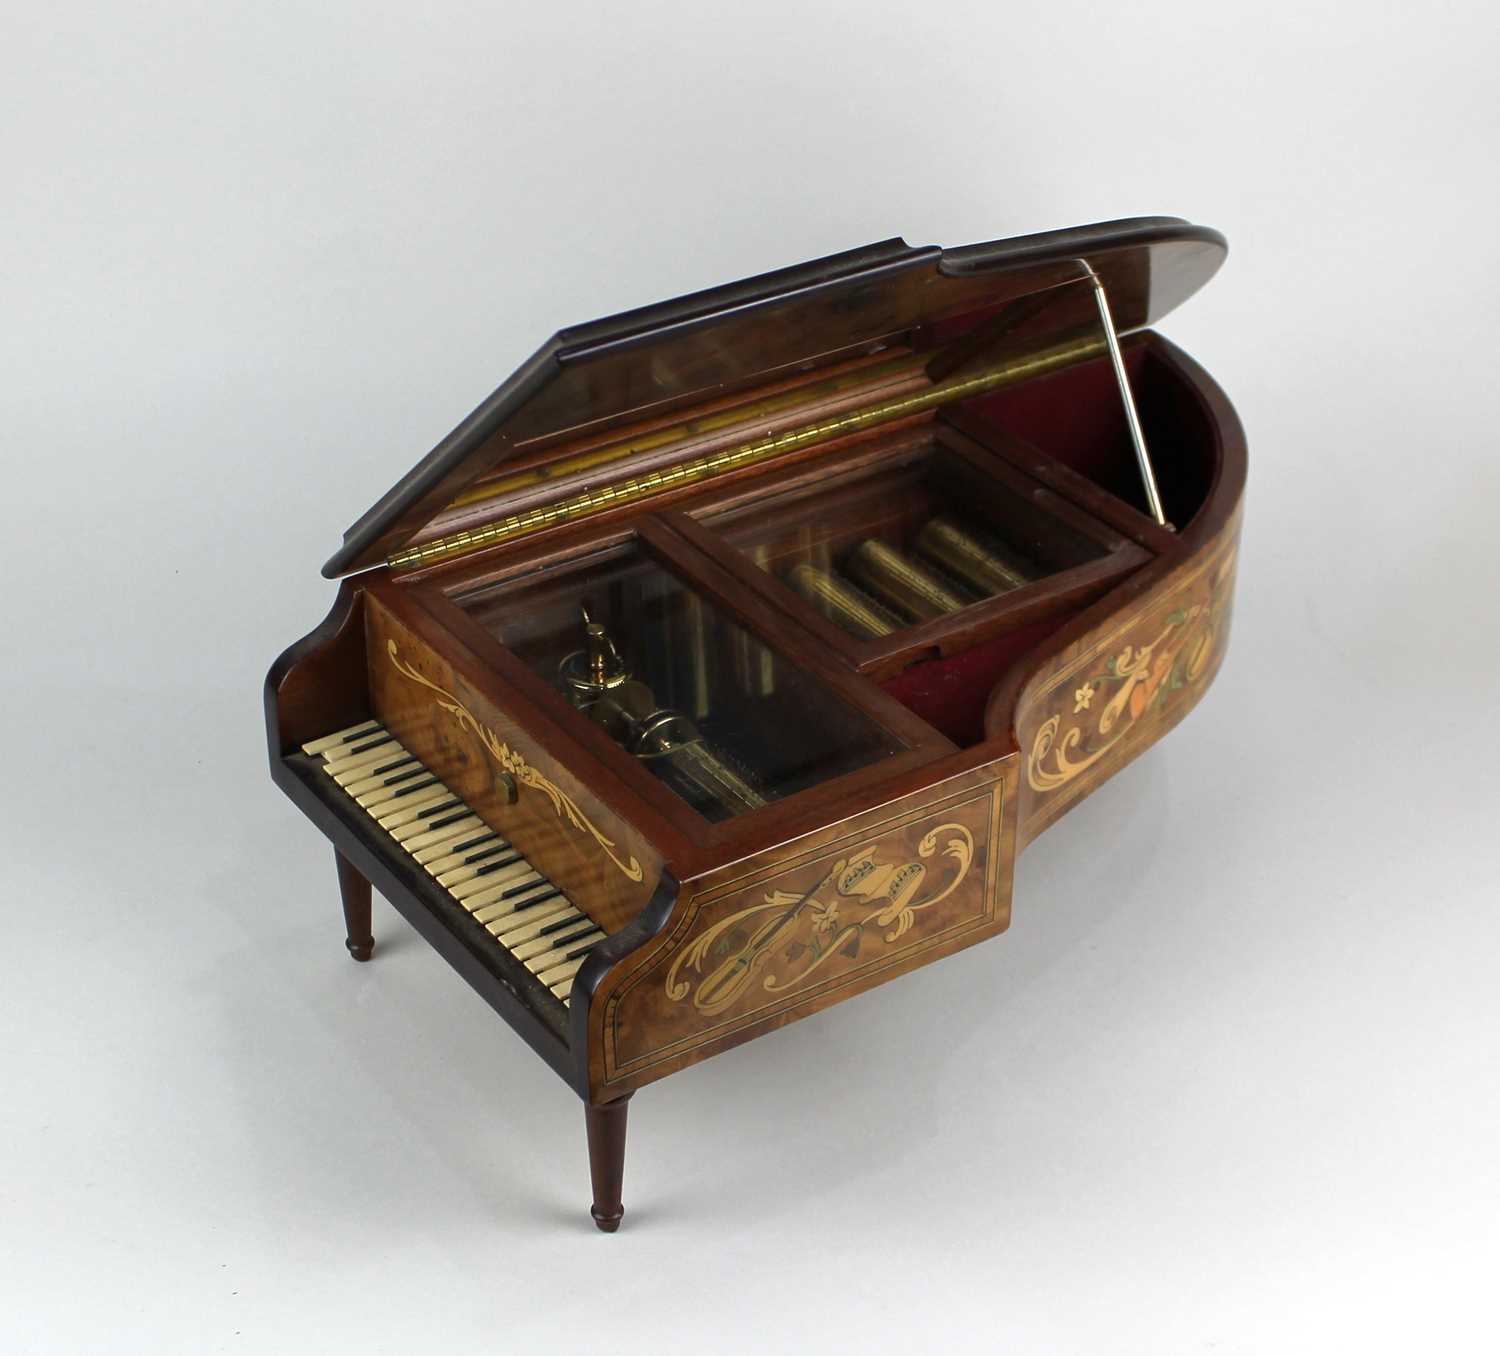 A music box modelled as a concert grand piano with label inscribed 'The Concert Music box of